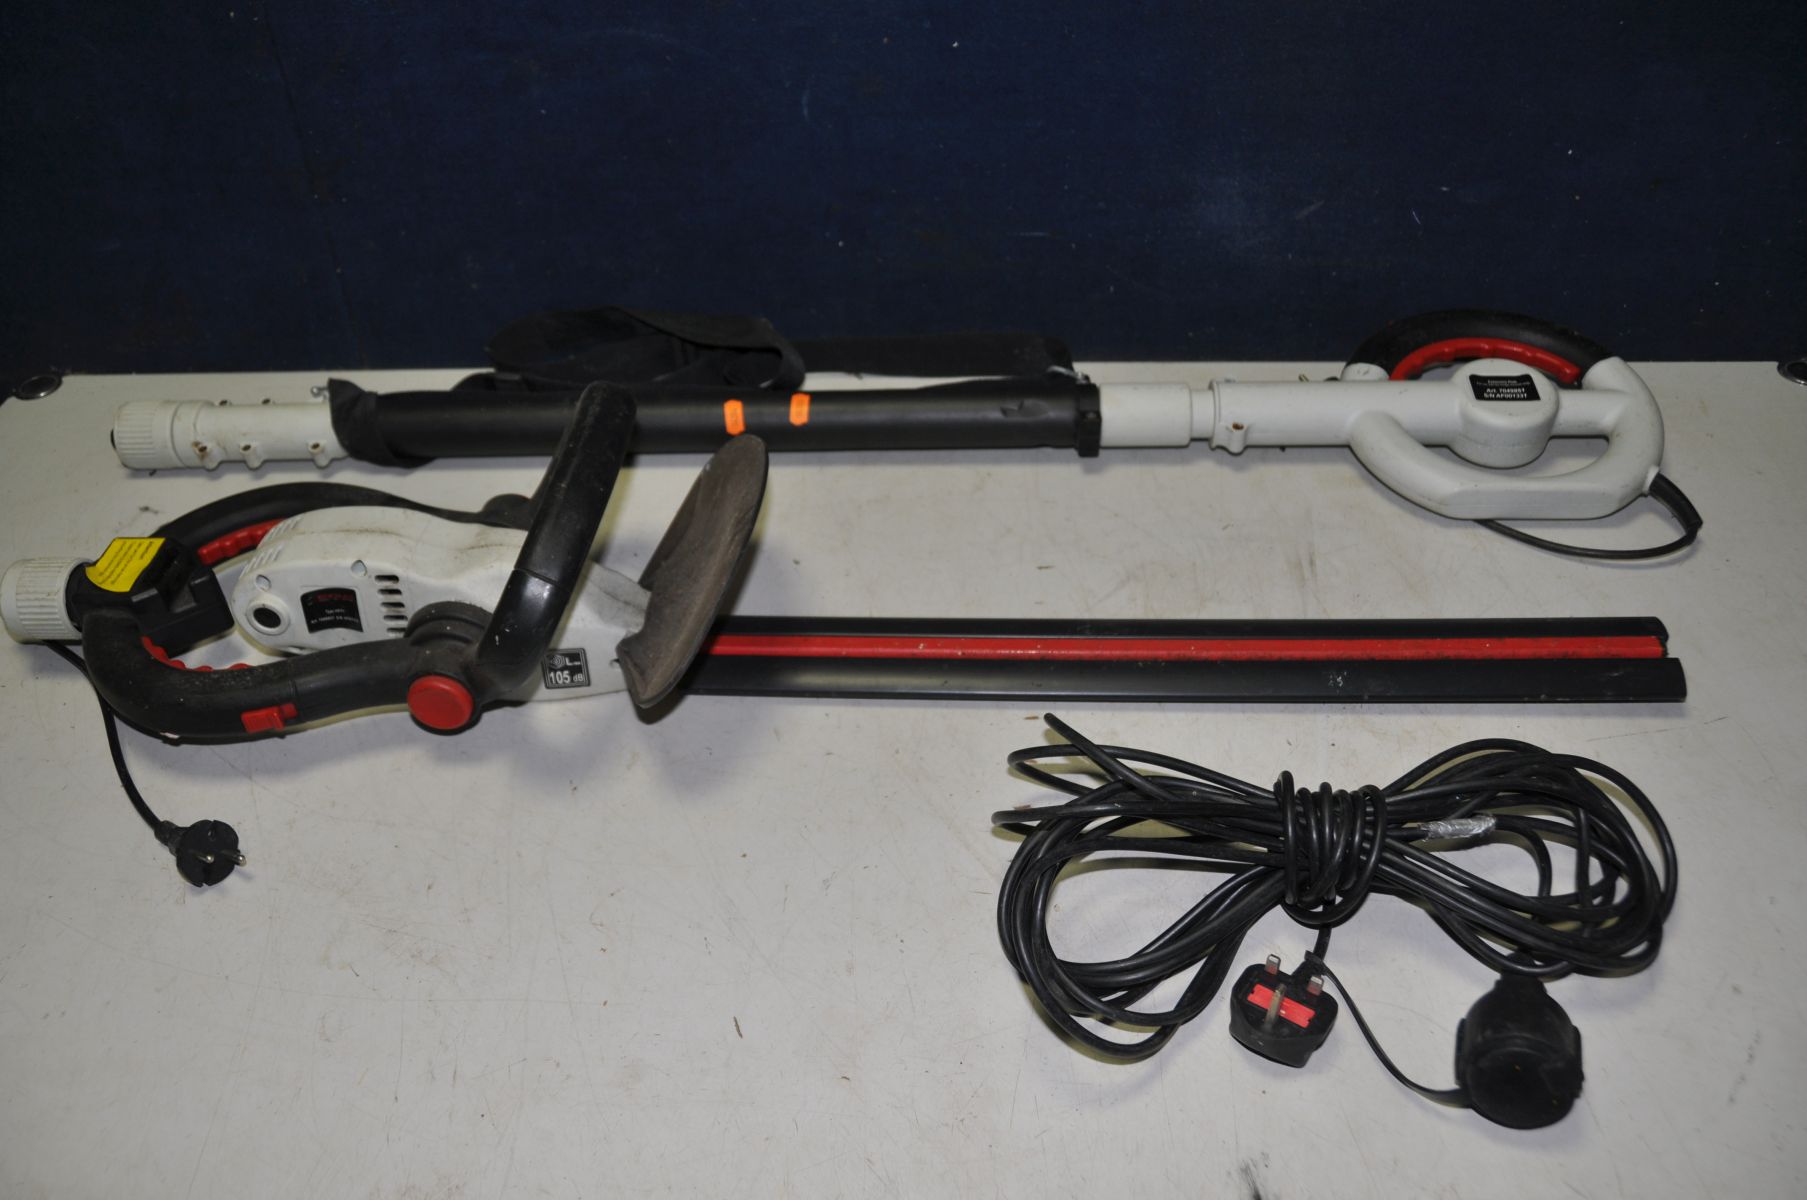 A ECK-MAN HPT1 corded hedge trimmer with extension pole (PAT pass and working) - Bild 2 aus 2